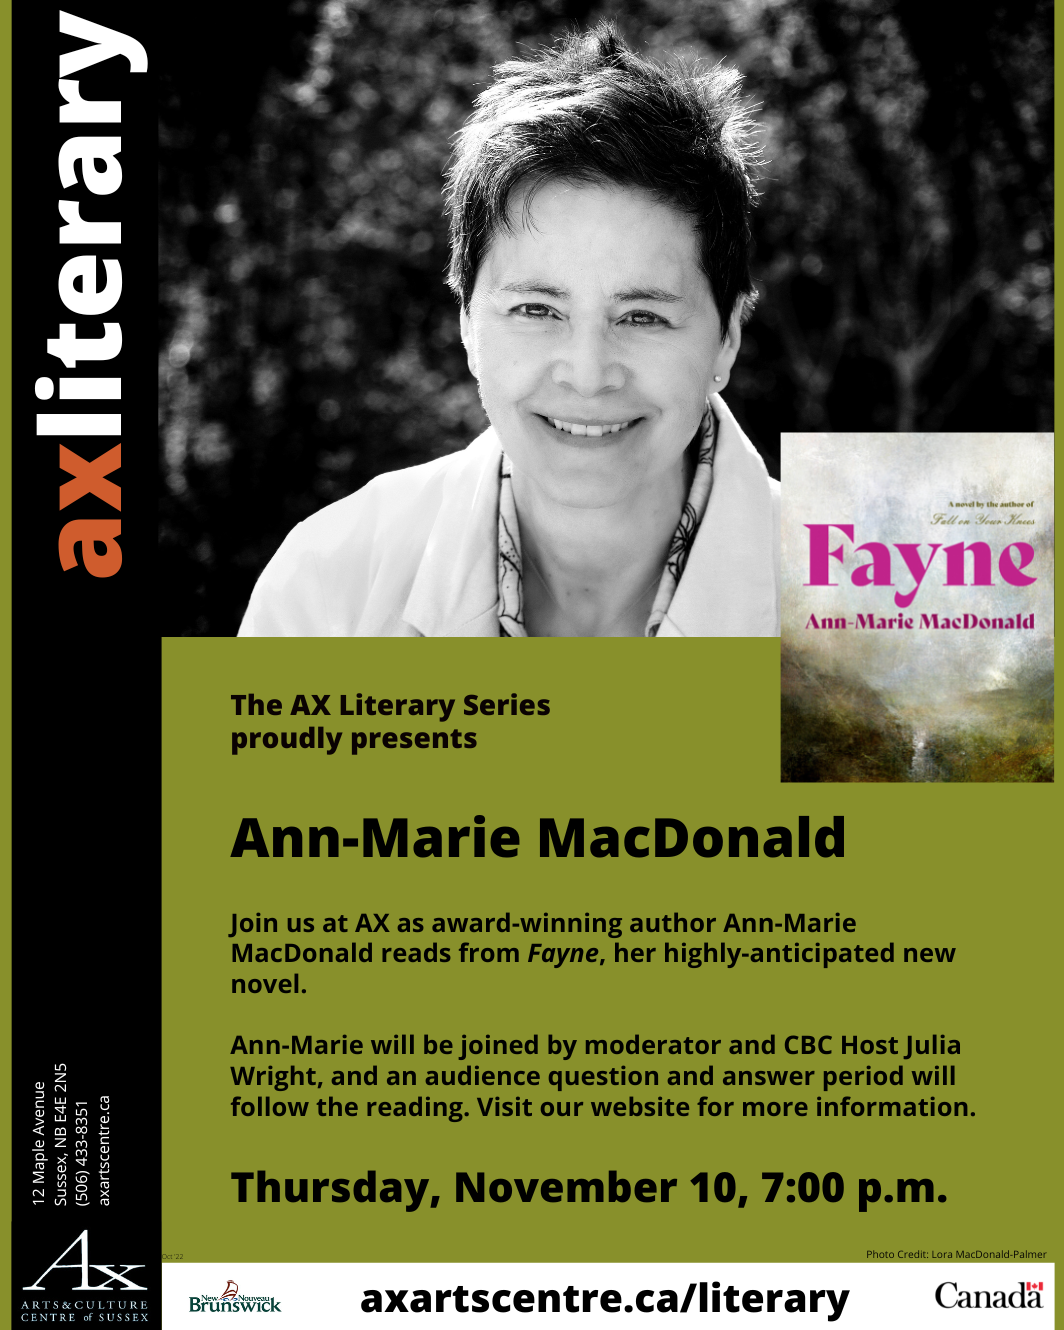 The AX Literary Series presents Ann-Marie MacDonald. Join us at the AX as award-winning author Ann-Marie MacDonald reads from Fayne, her highly-anticipated new novel. Ann-Marie will be joined by moderator and CBC host Julia Wright and an audience question and answer period will follow that reading. Visit our website for more information. Thursday, November 10, 7pm. axartscentre.ca/literary